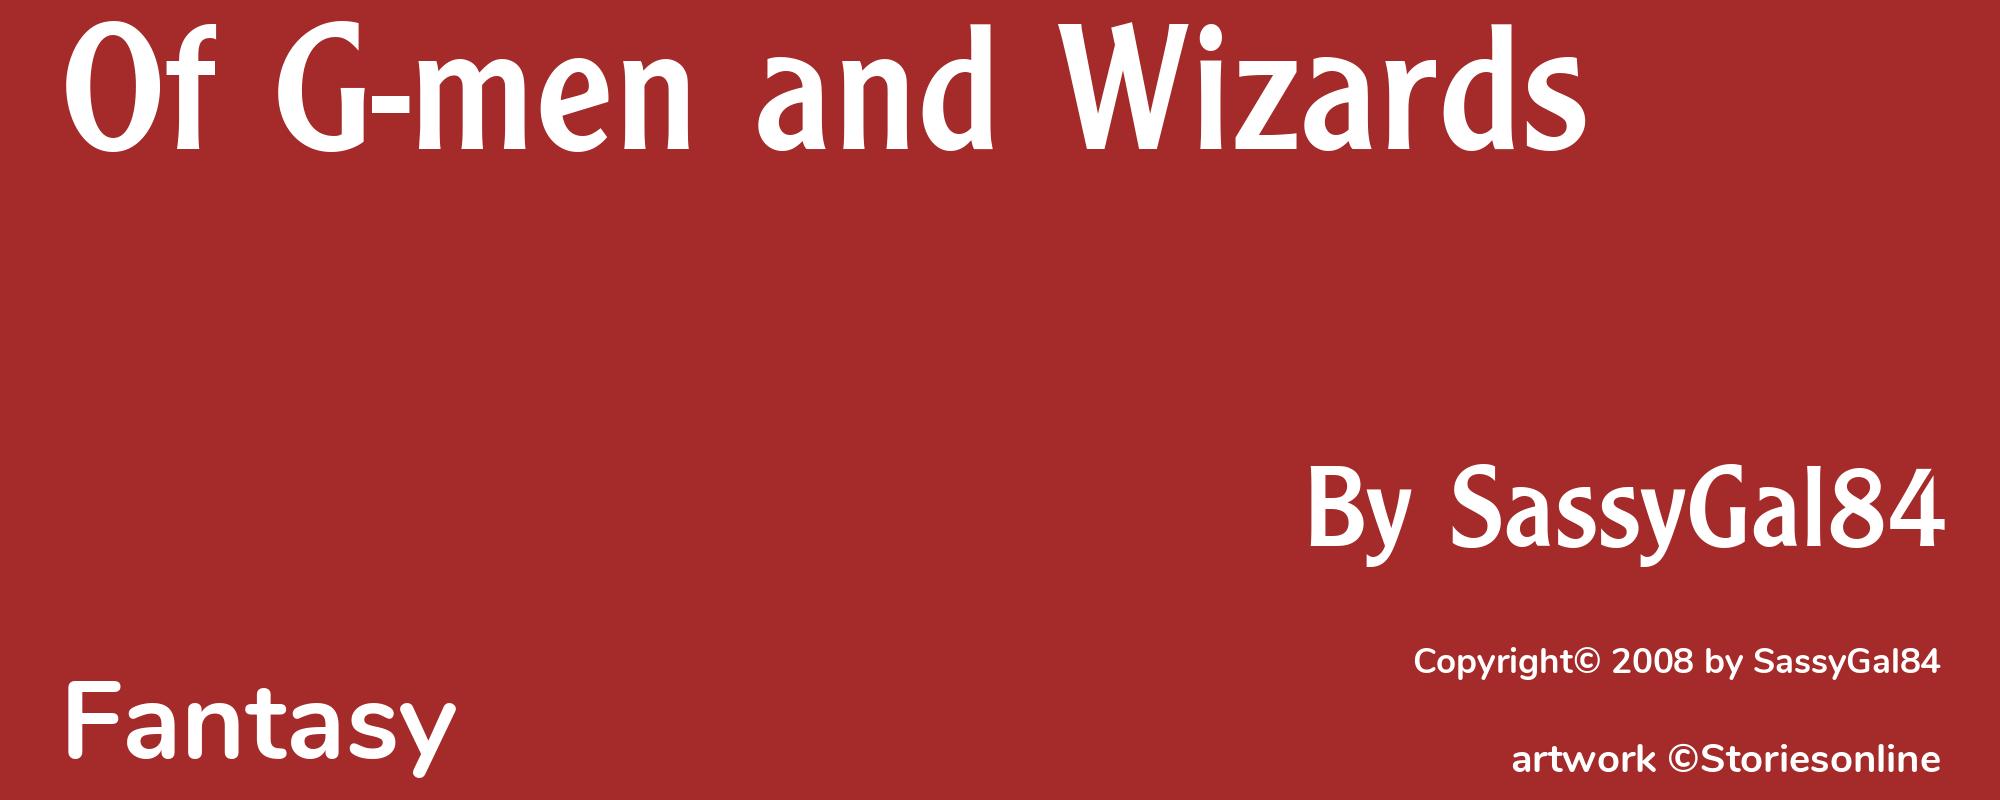 Of G-men and Wizards - Cover